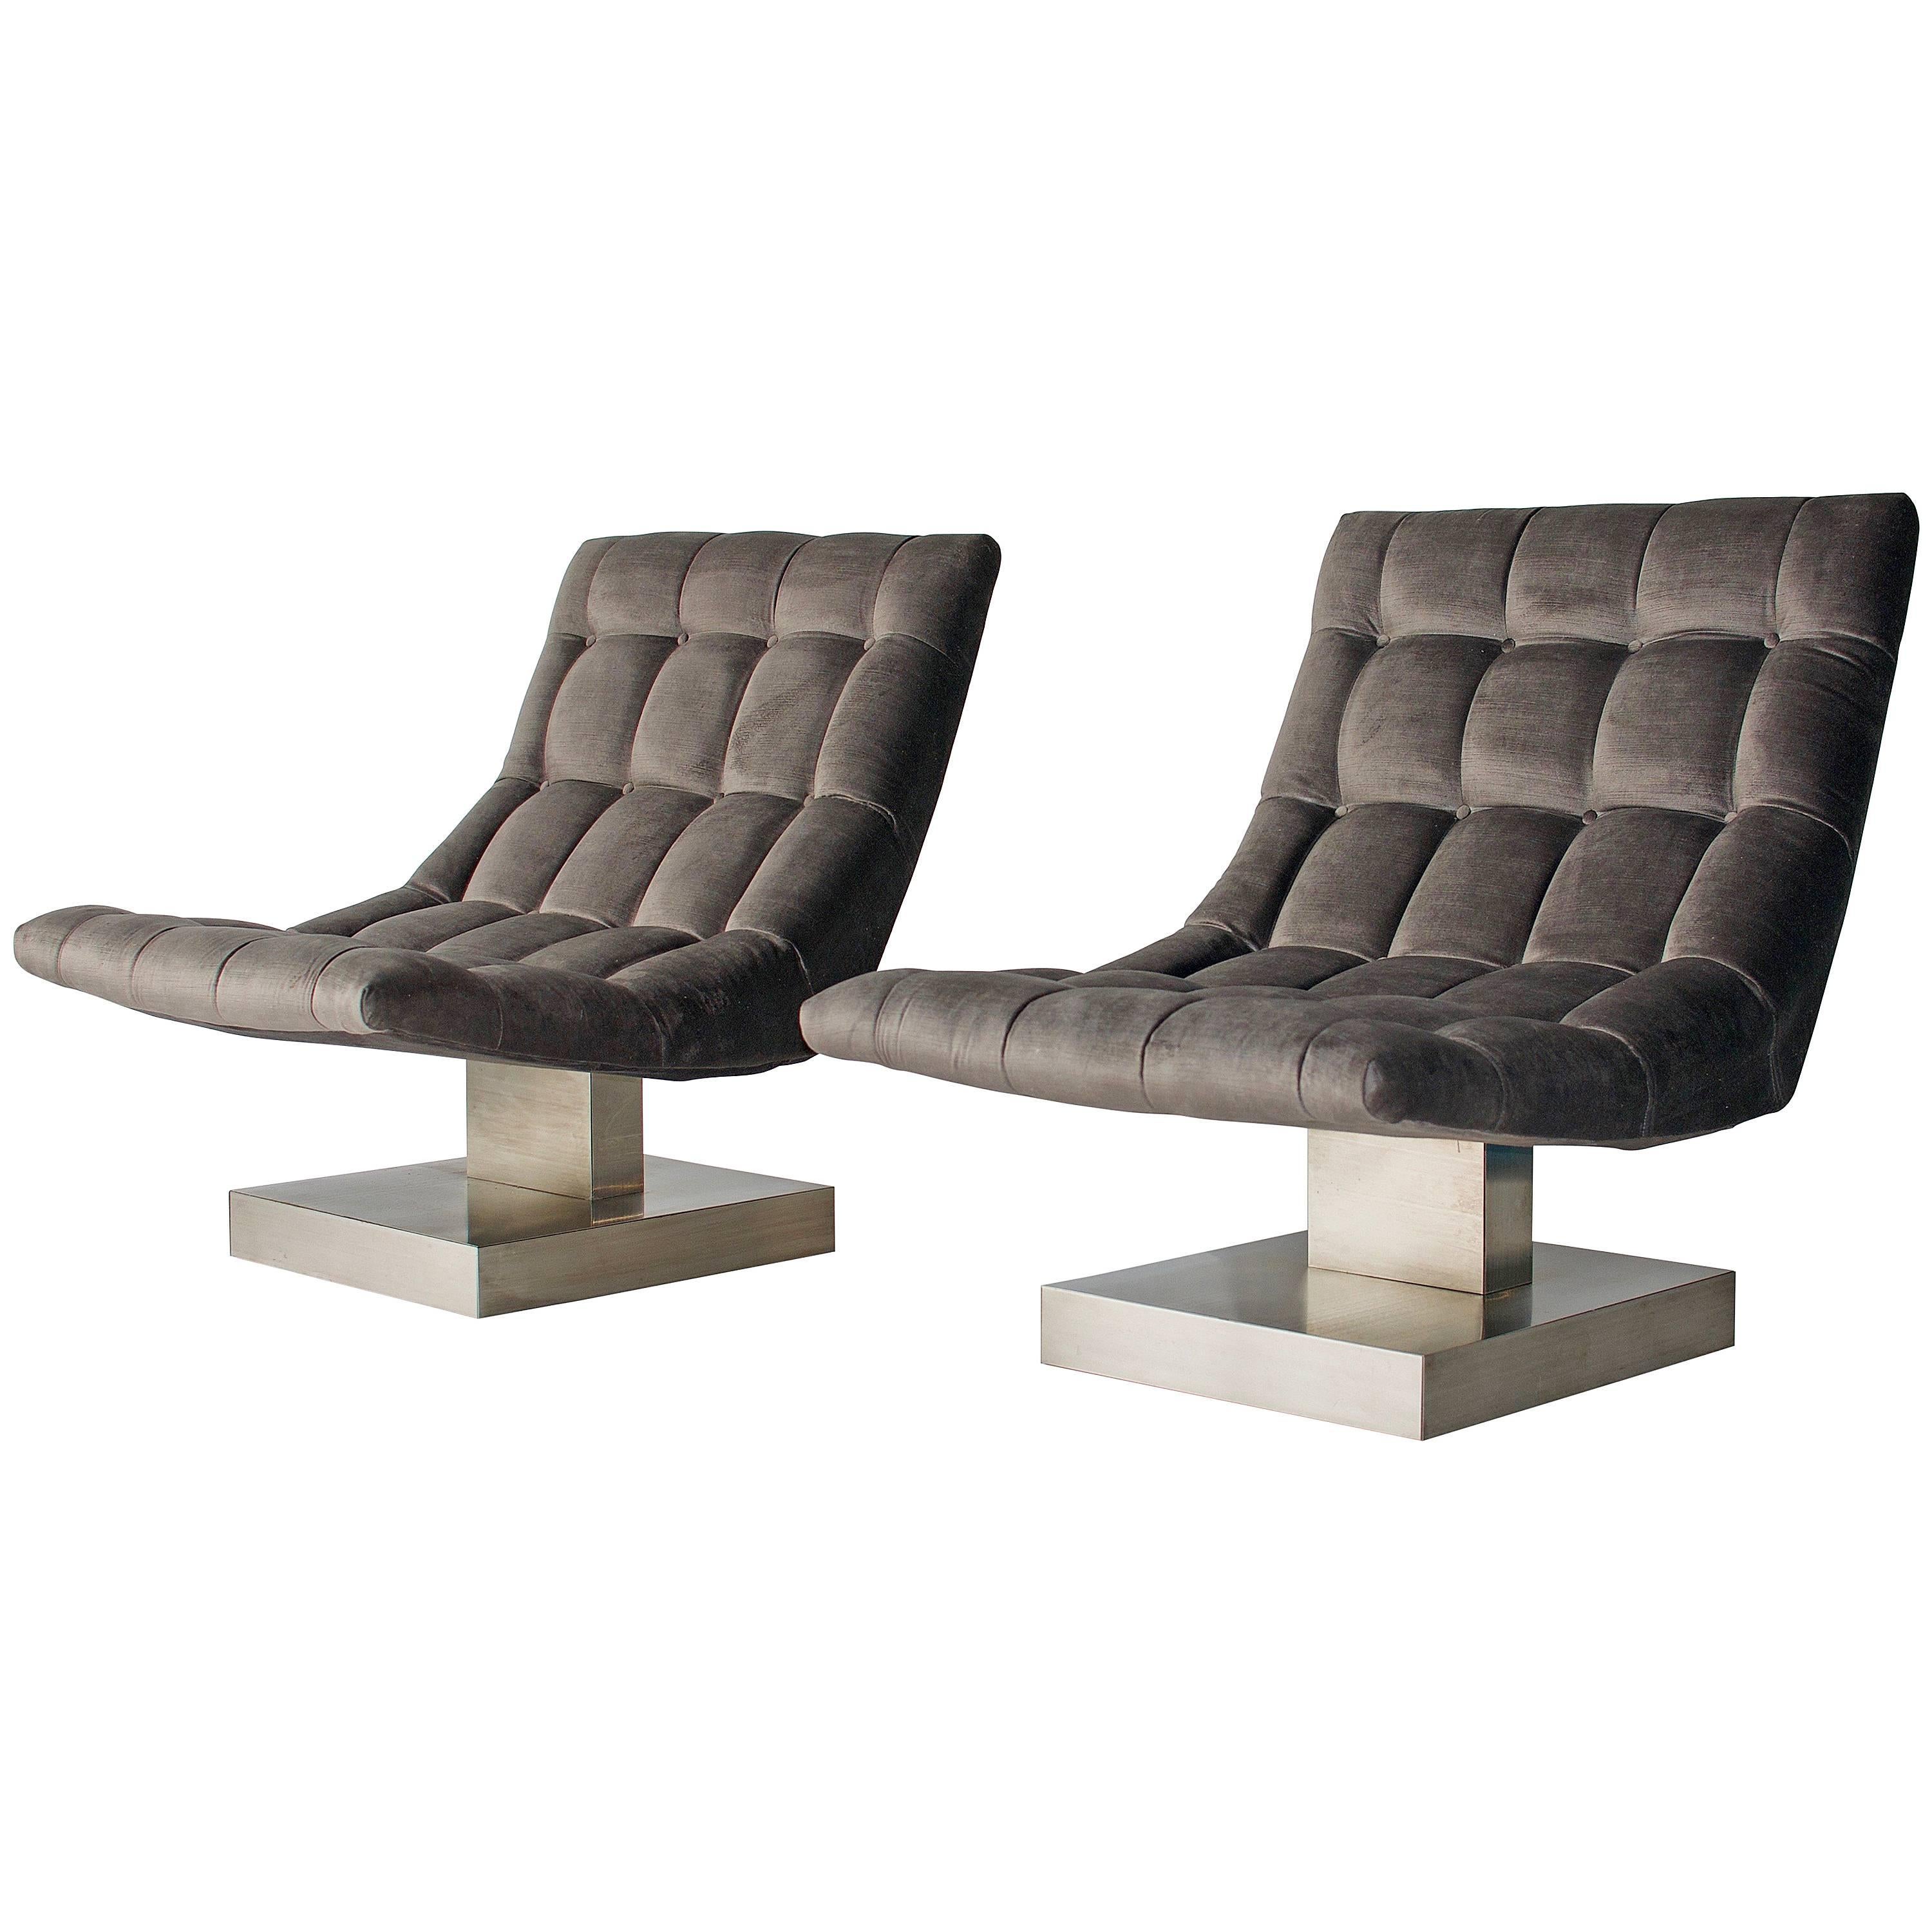 Pair of Milo Baughman Cantilevered Lounge Chairs